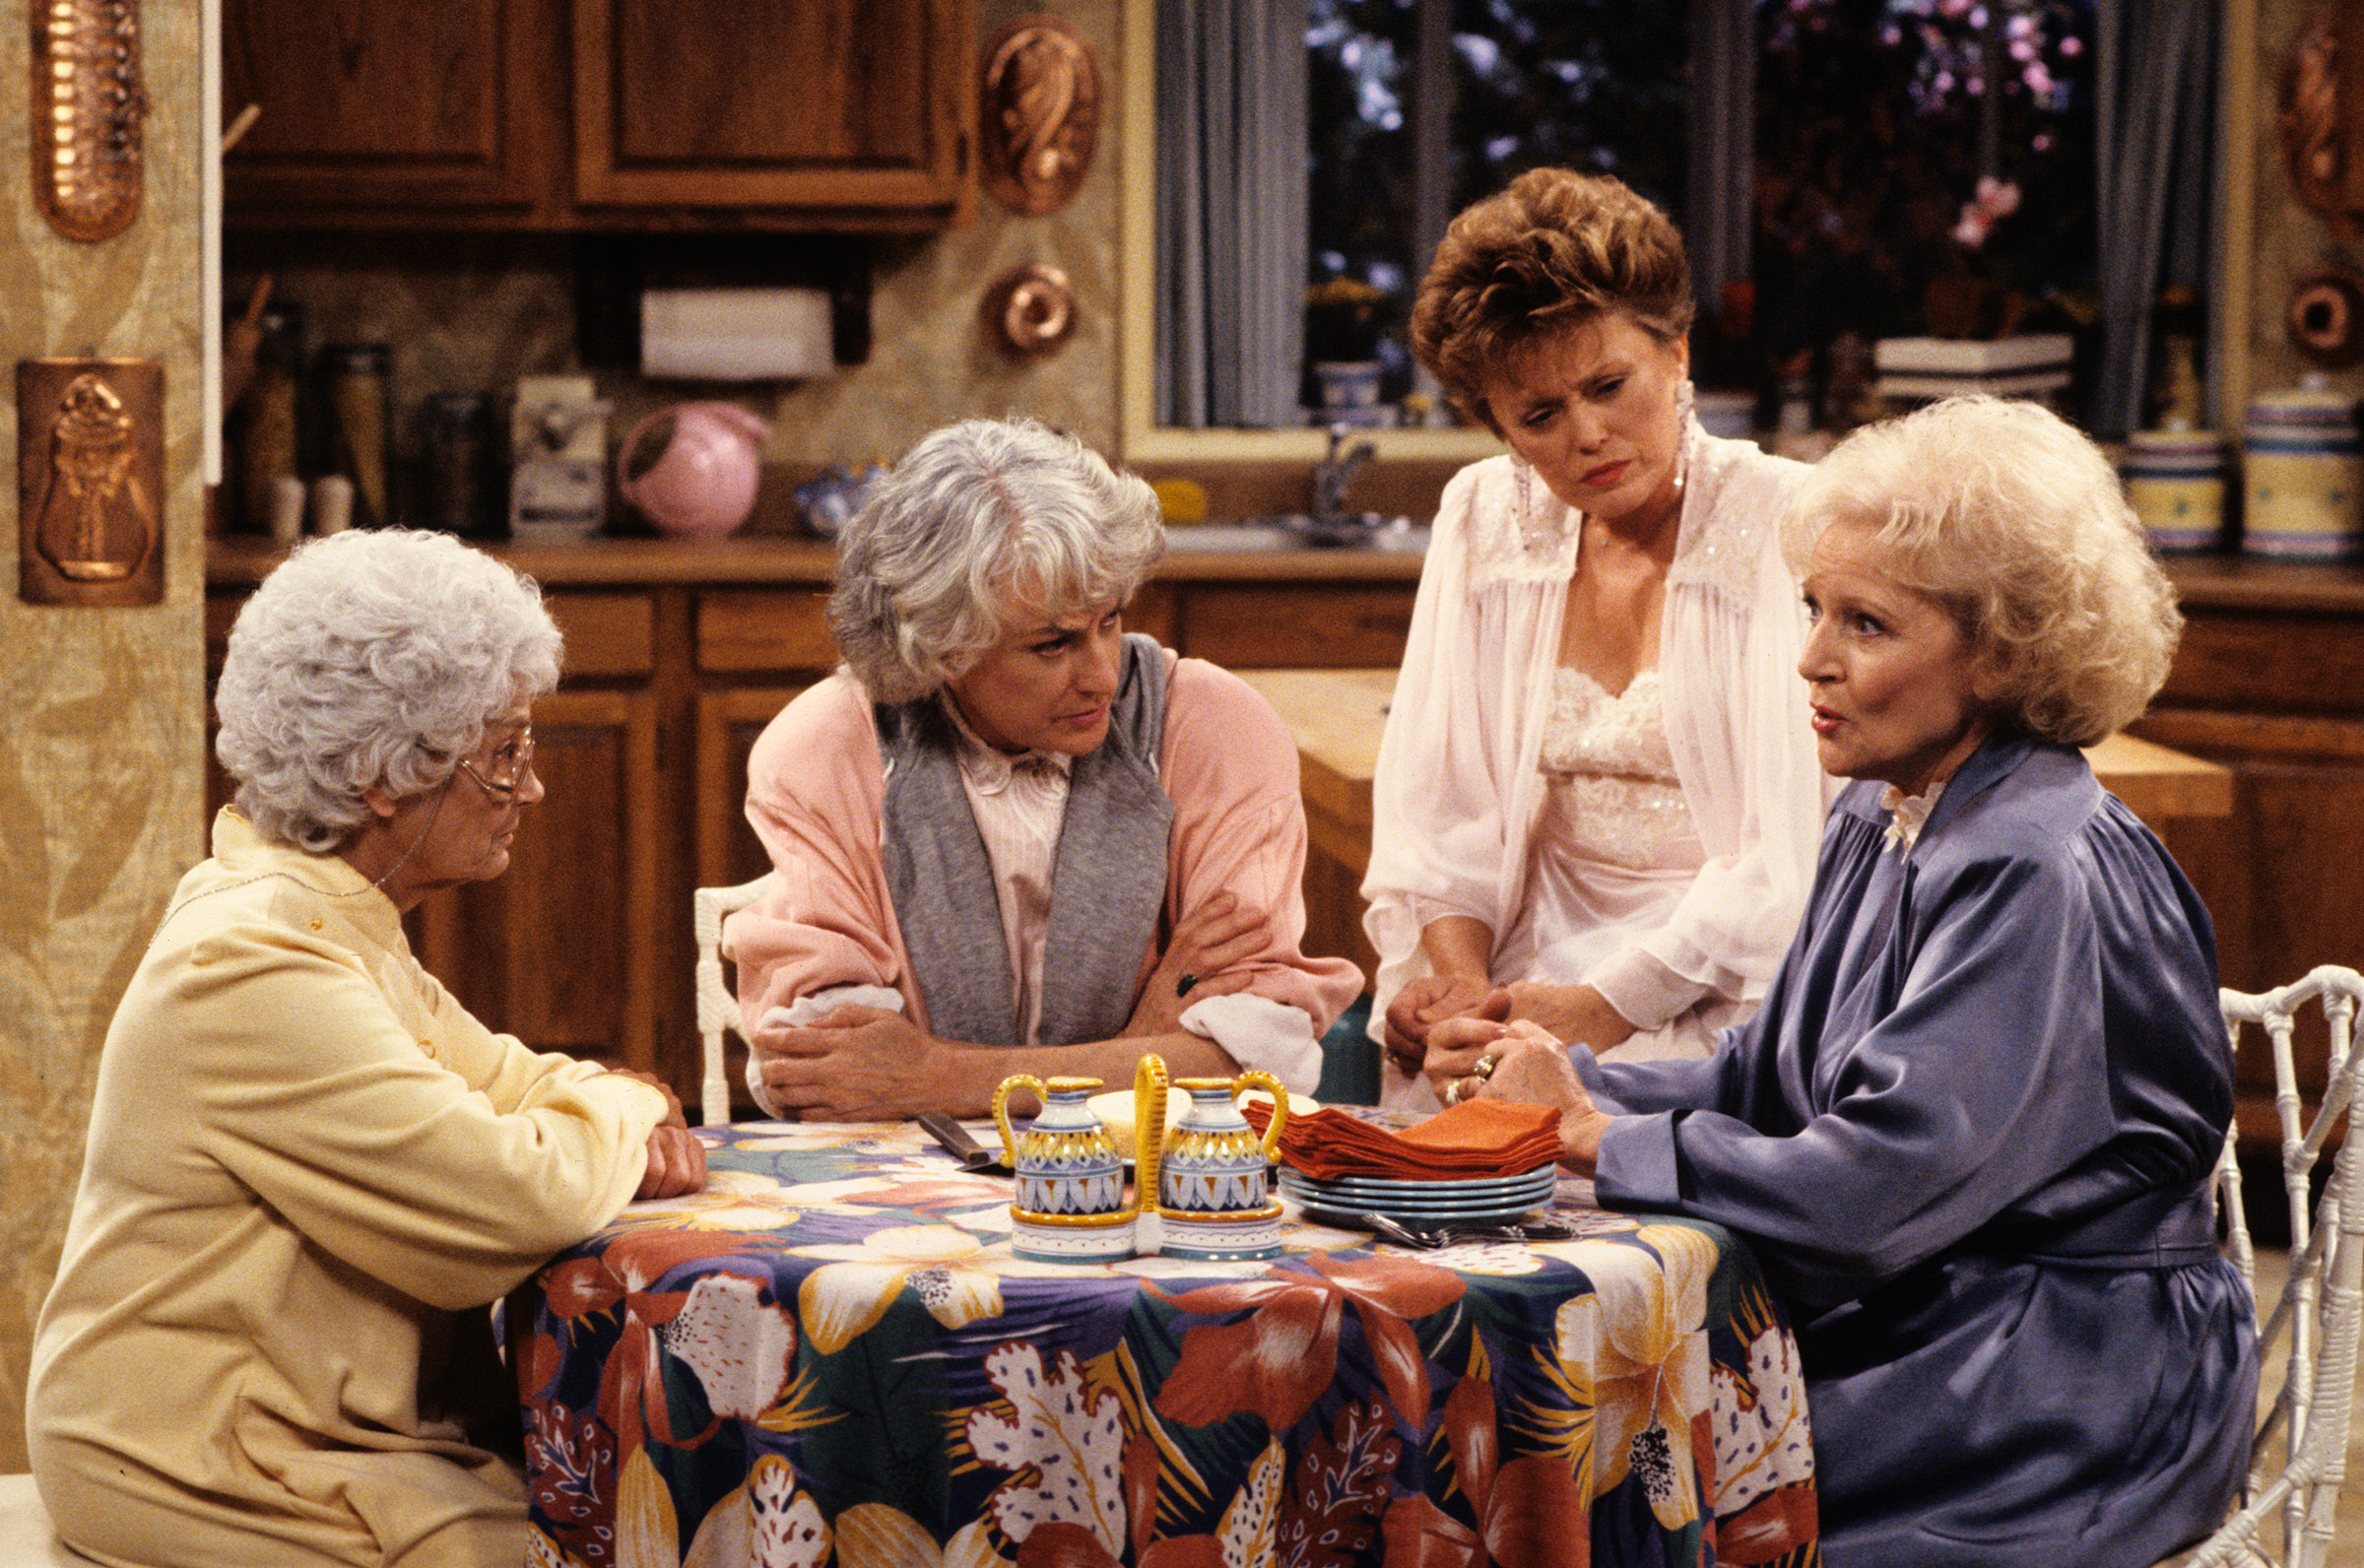 From left, Estelle Getty as Sophia Petrillo, Bea Arthur as Dorothy Petrillo Zbornak, Rue McClanahan as Blanche Devereaux and Betty White as Rose Nylund on The Golden Girls. (ABC Photo Archives/Disney General Entertainment Content/Getty Images)